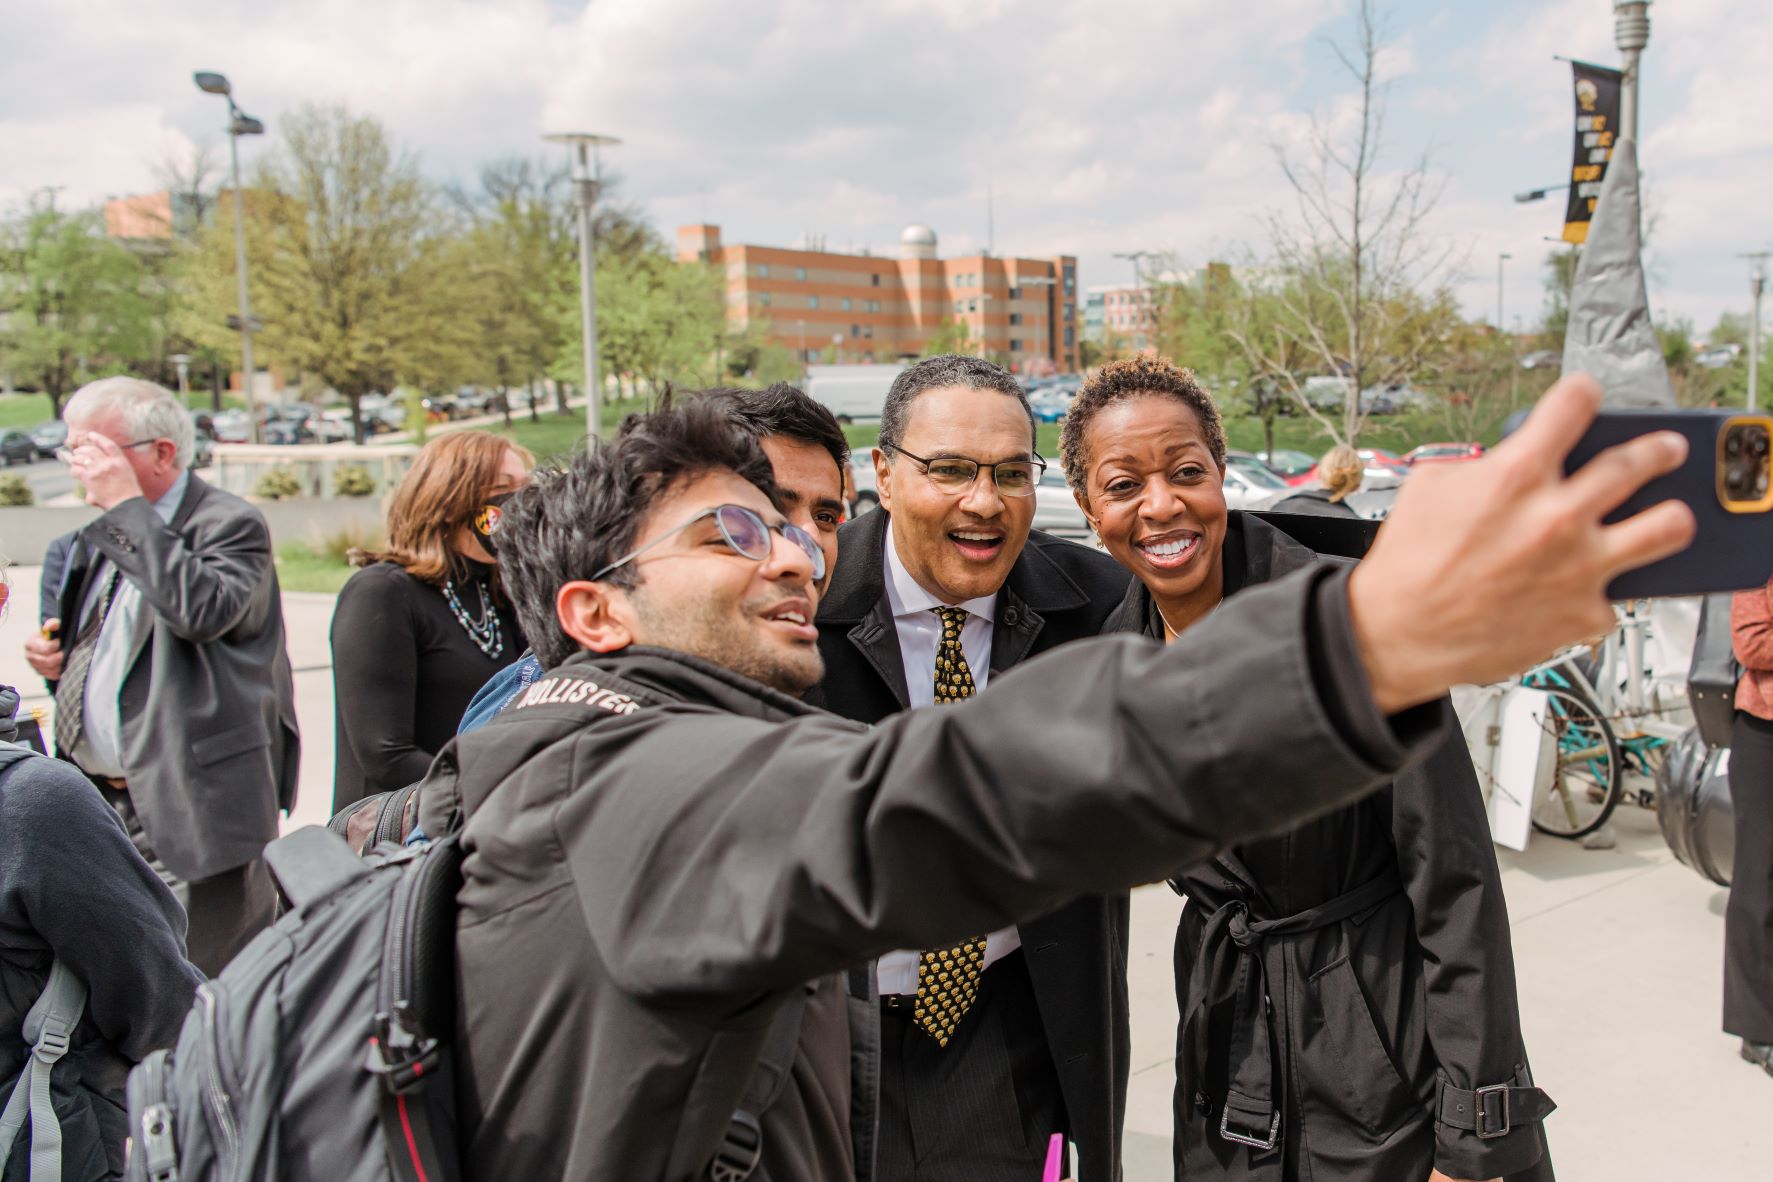 Two adults in professional attire pose for a selfie with a young adult outdoors, smiling. All wear light jackets.